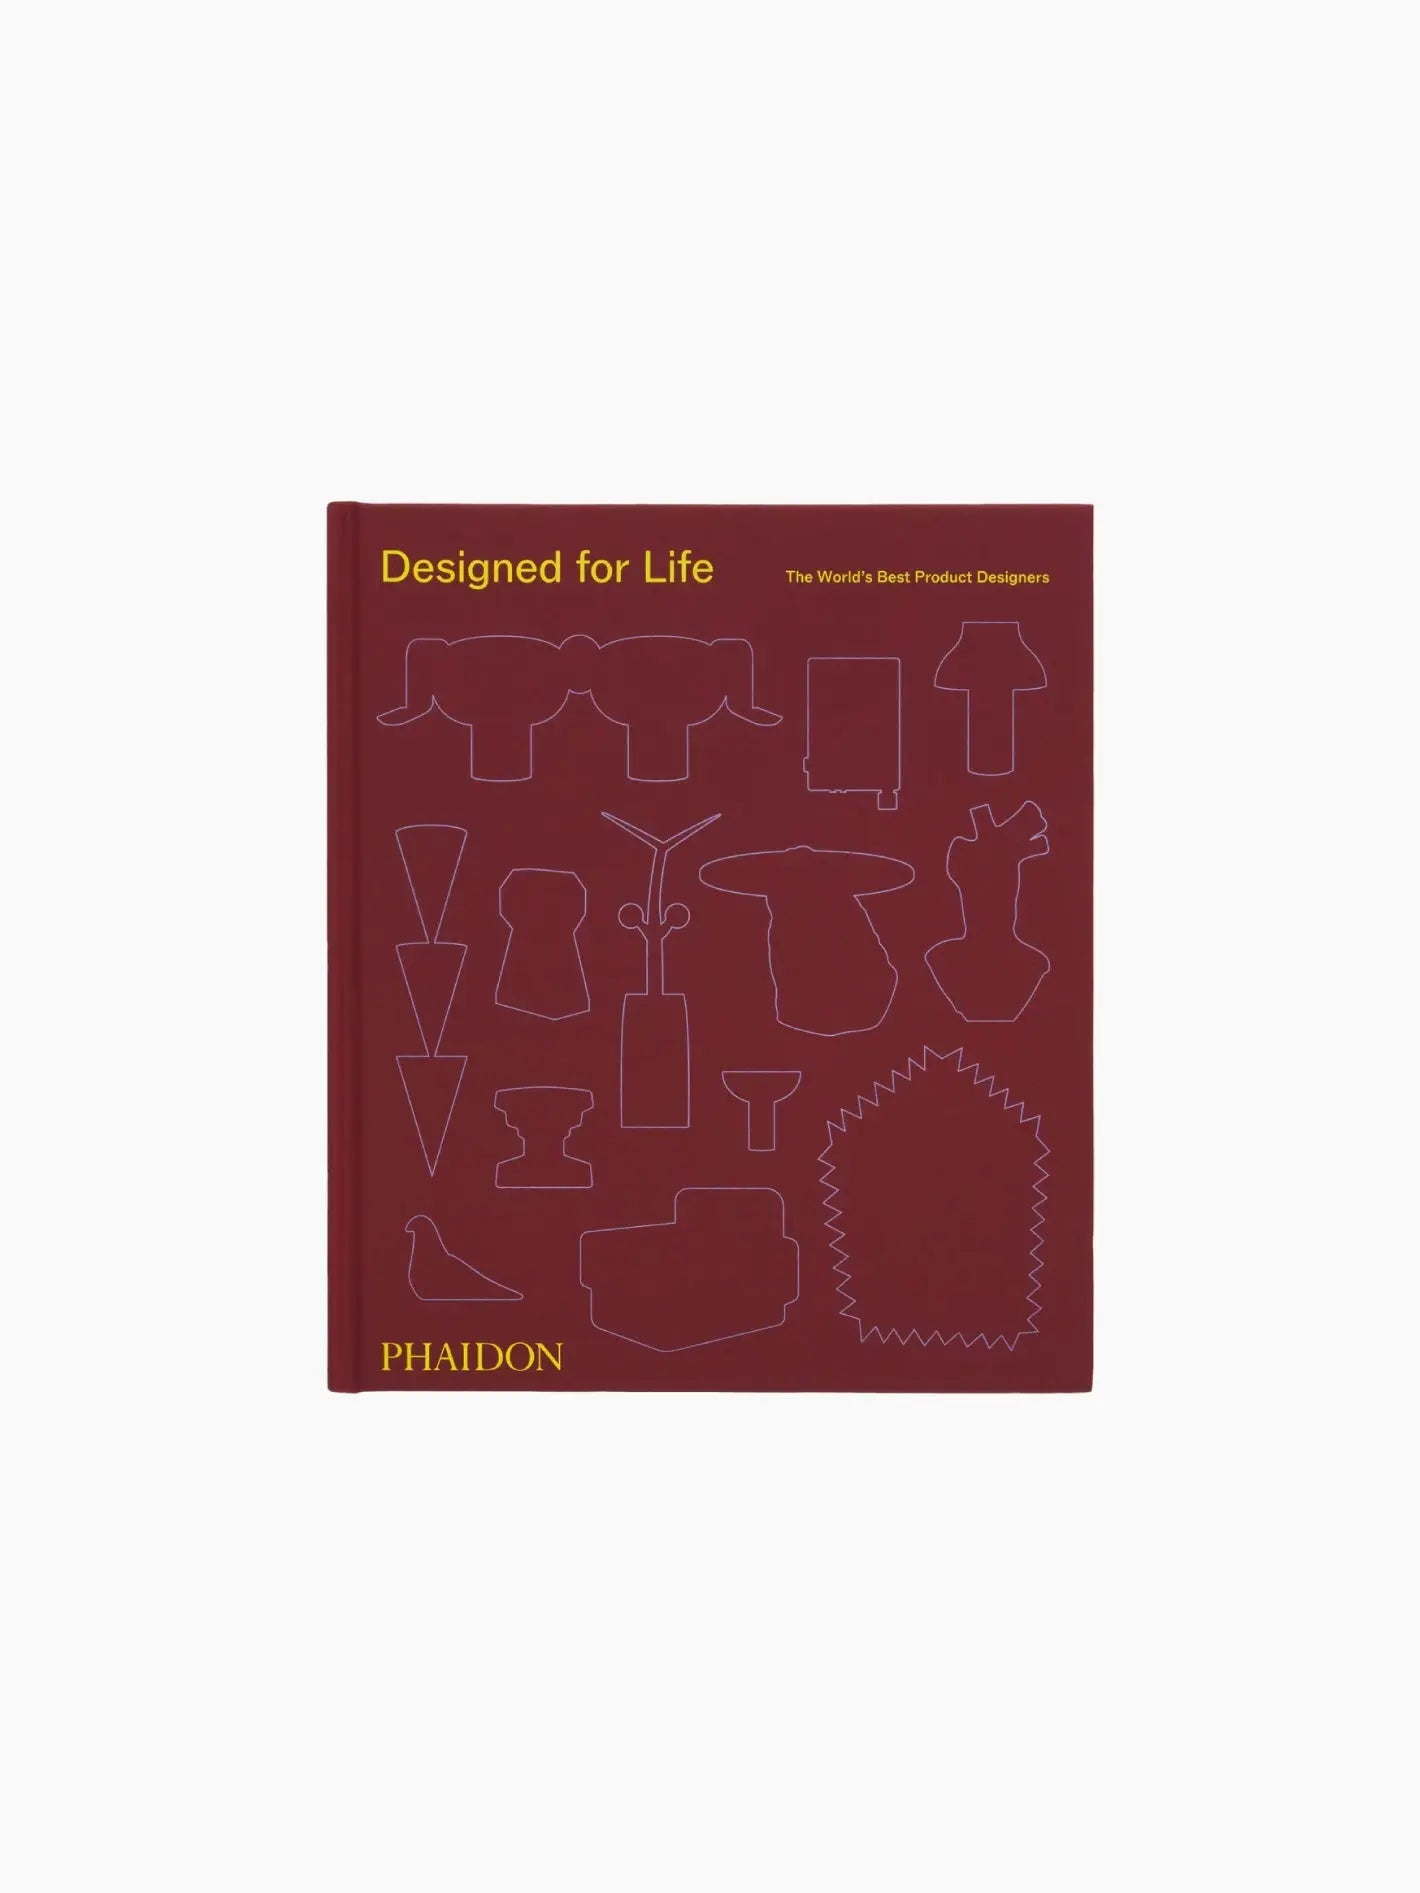 Designed for Life: The World’s Best Product Designers Phaidon